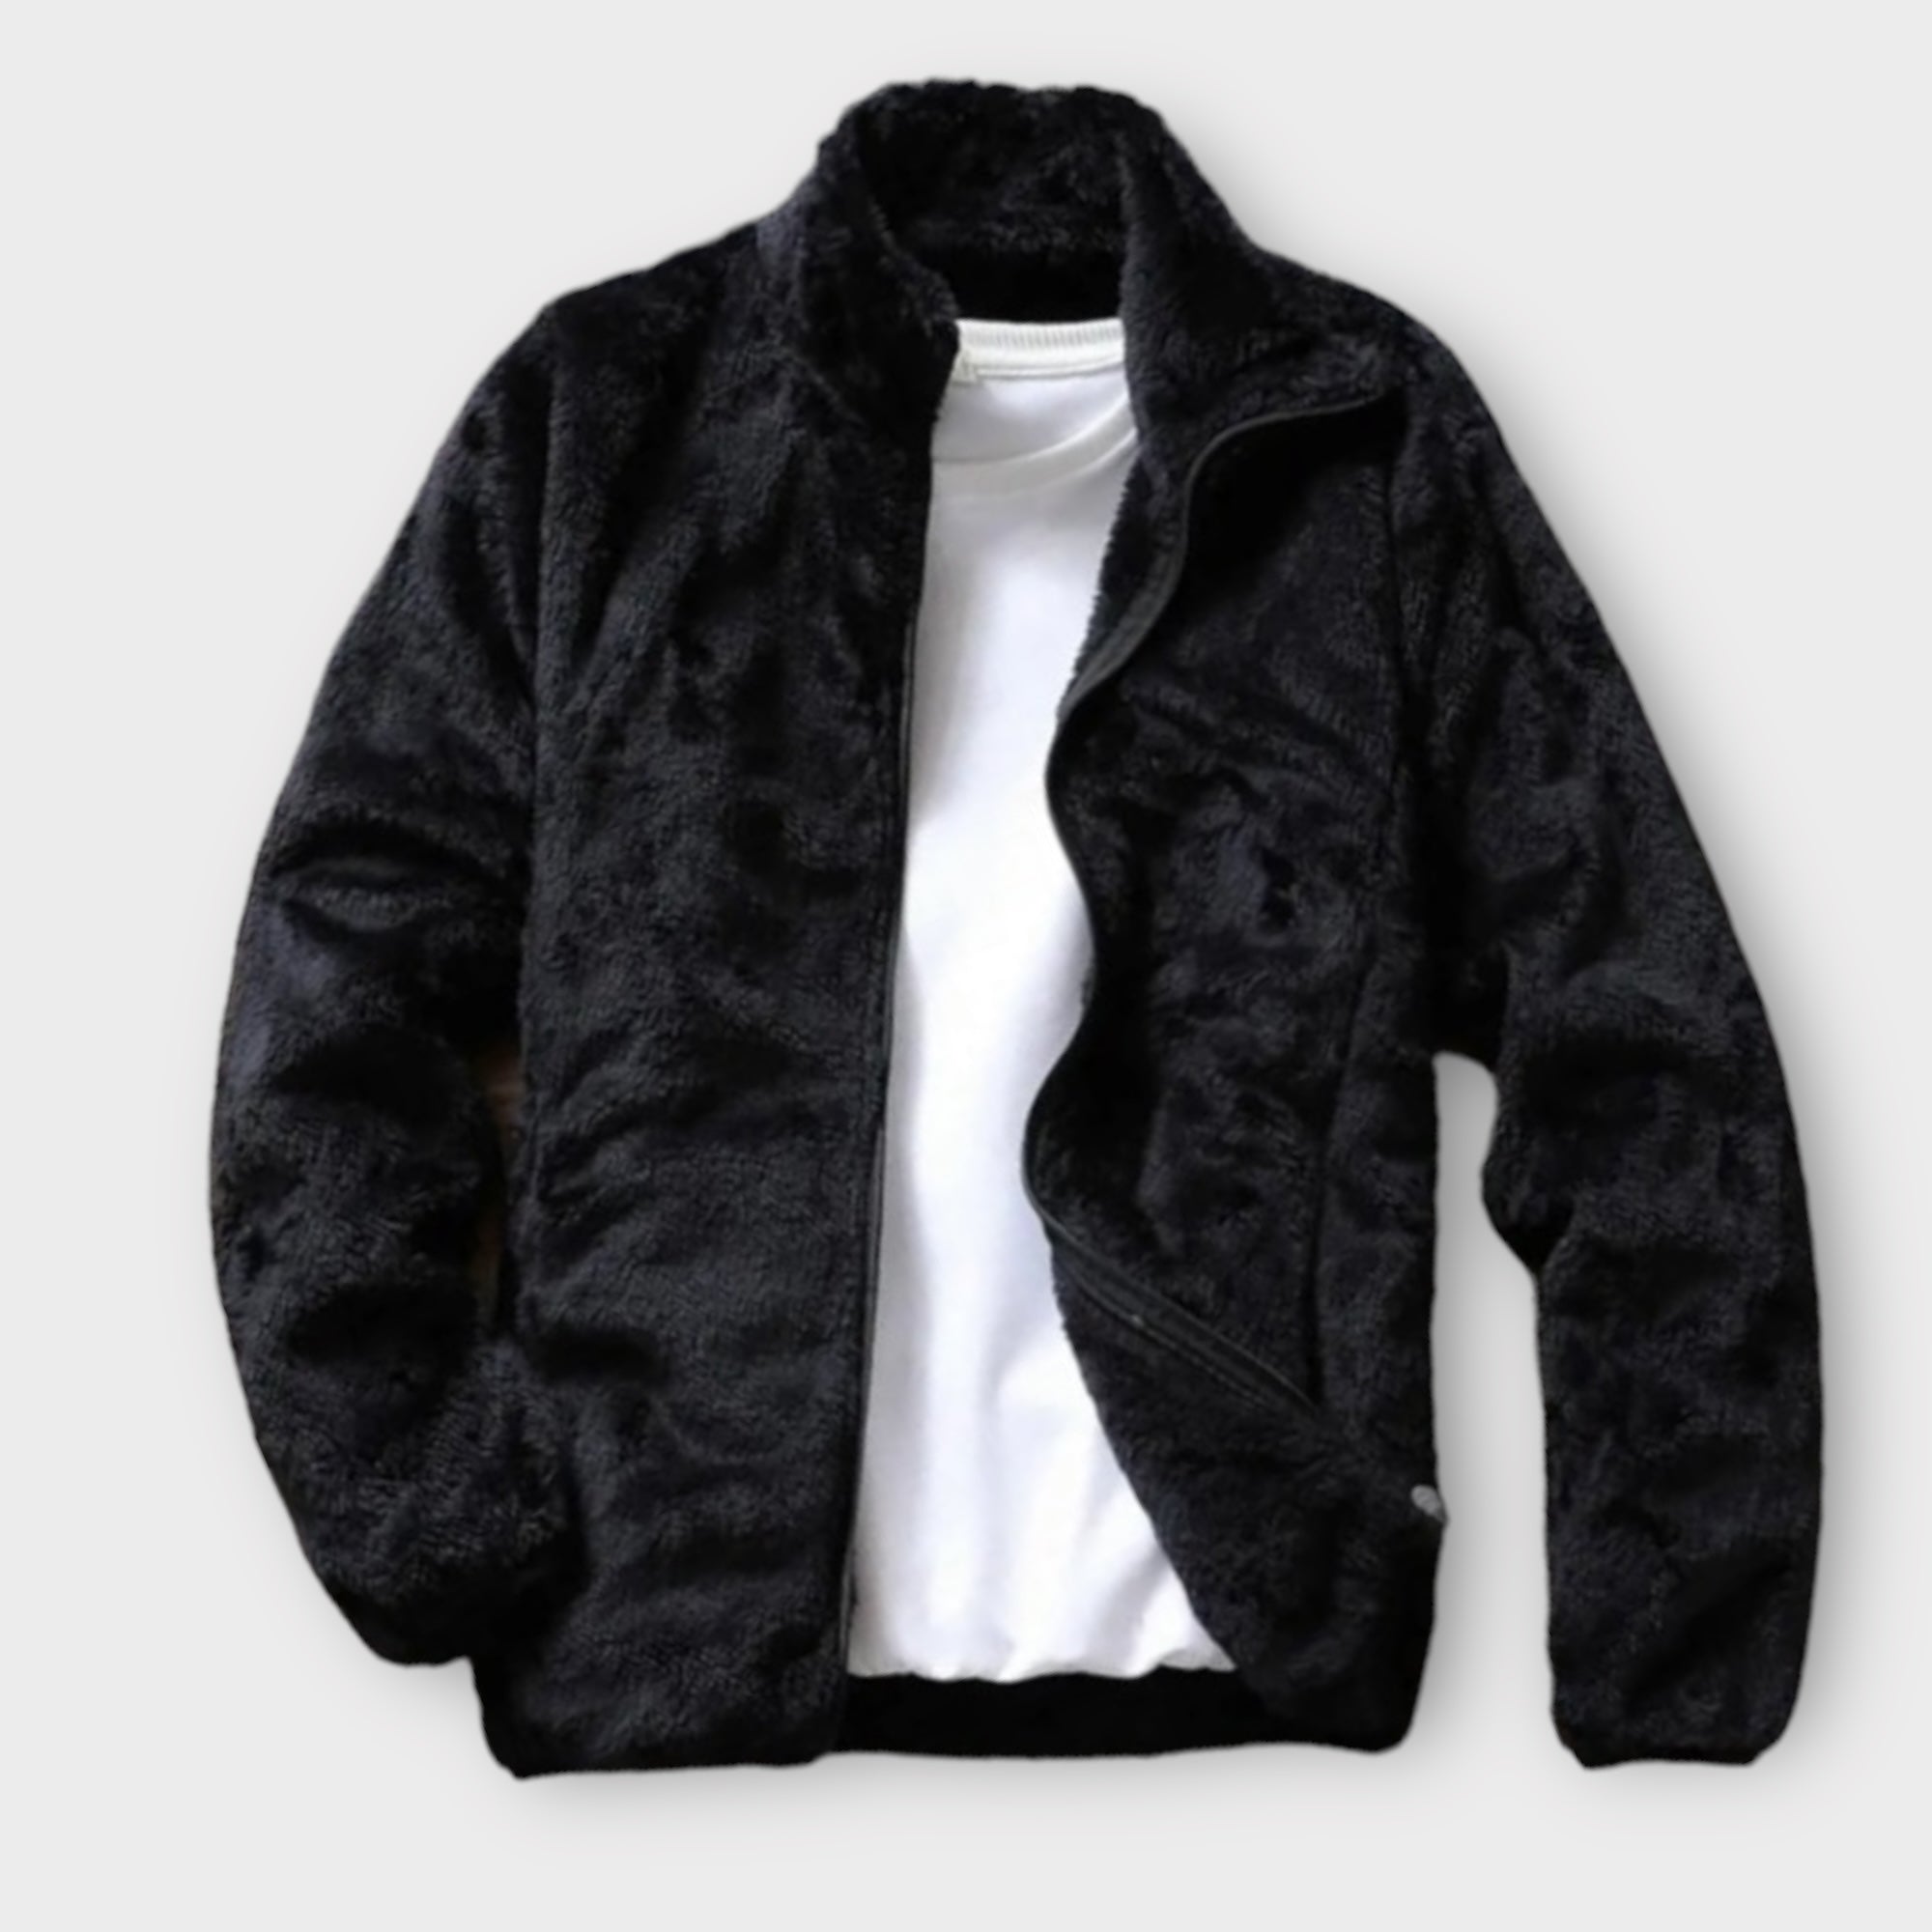 'OICO' A fashionable solid color fluffy coat for men